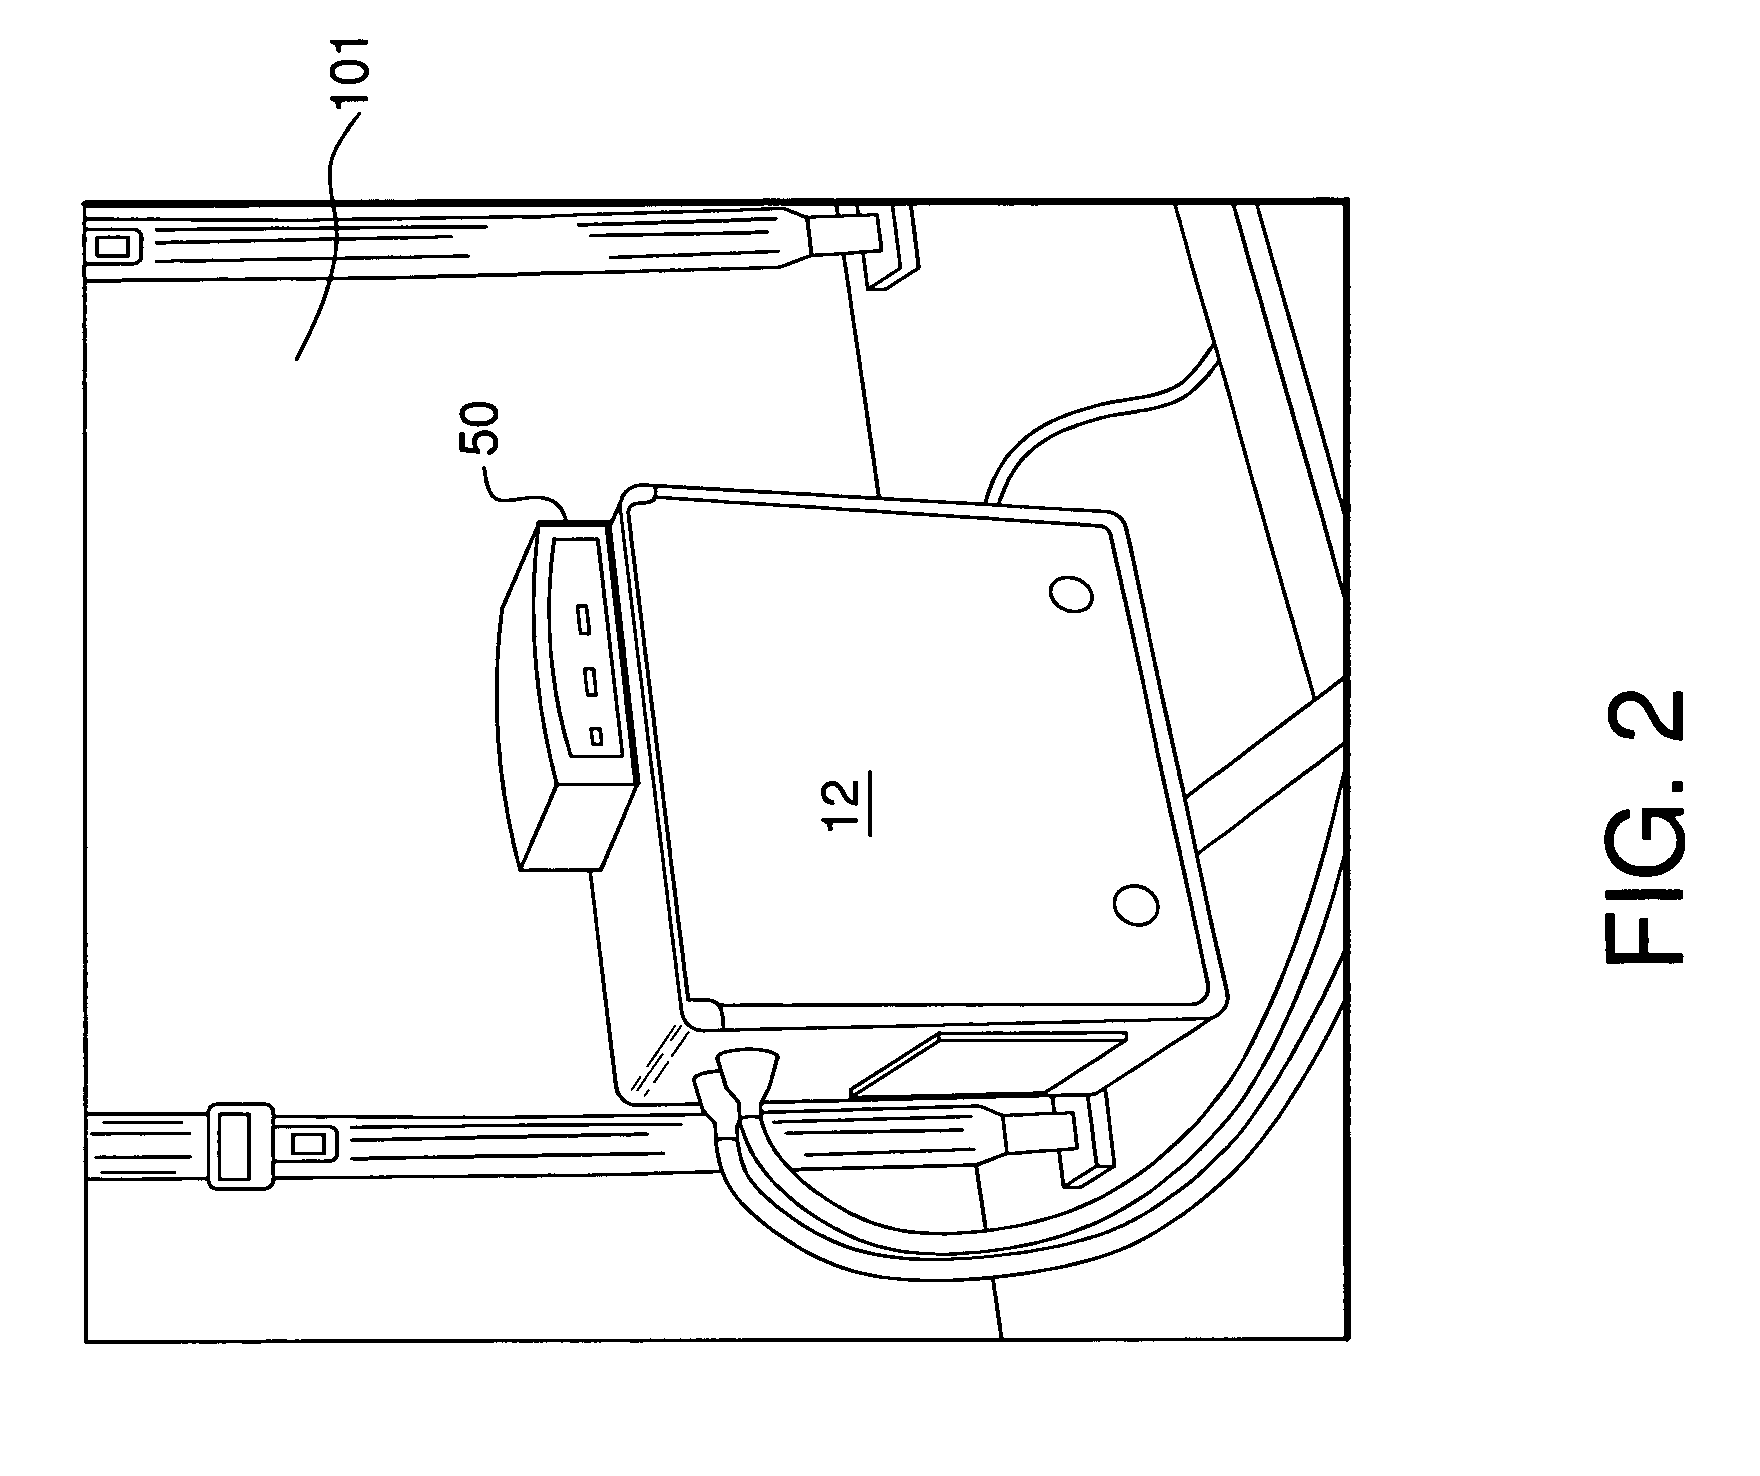 System for storing and retrieving a personal-transportation vehicle